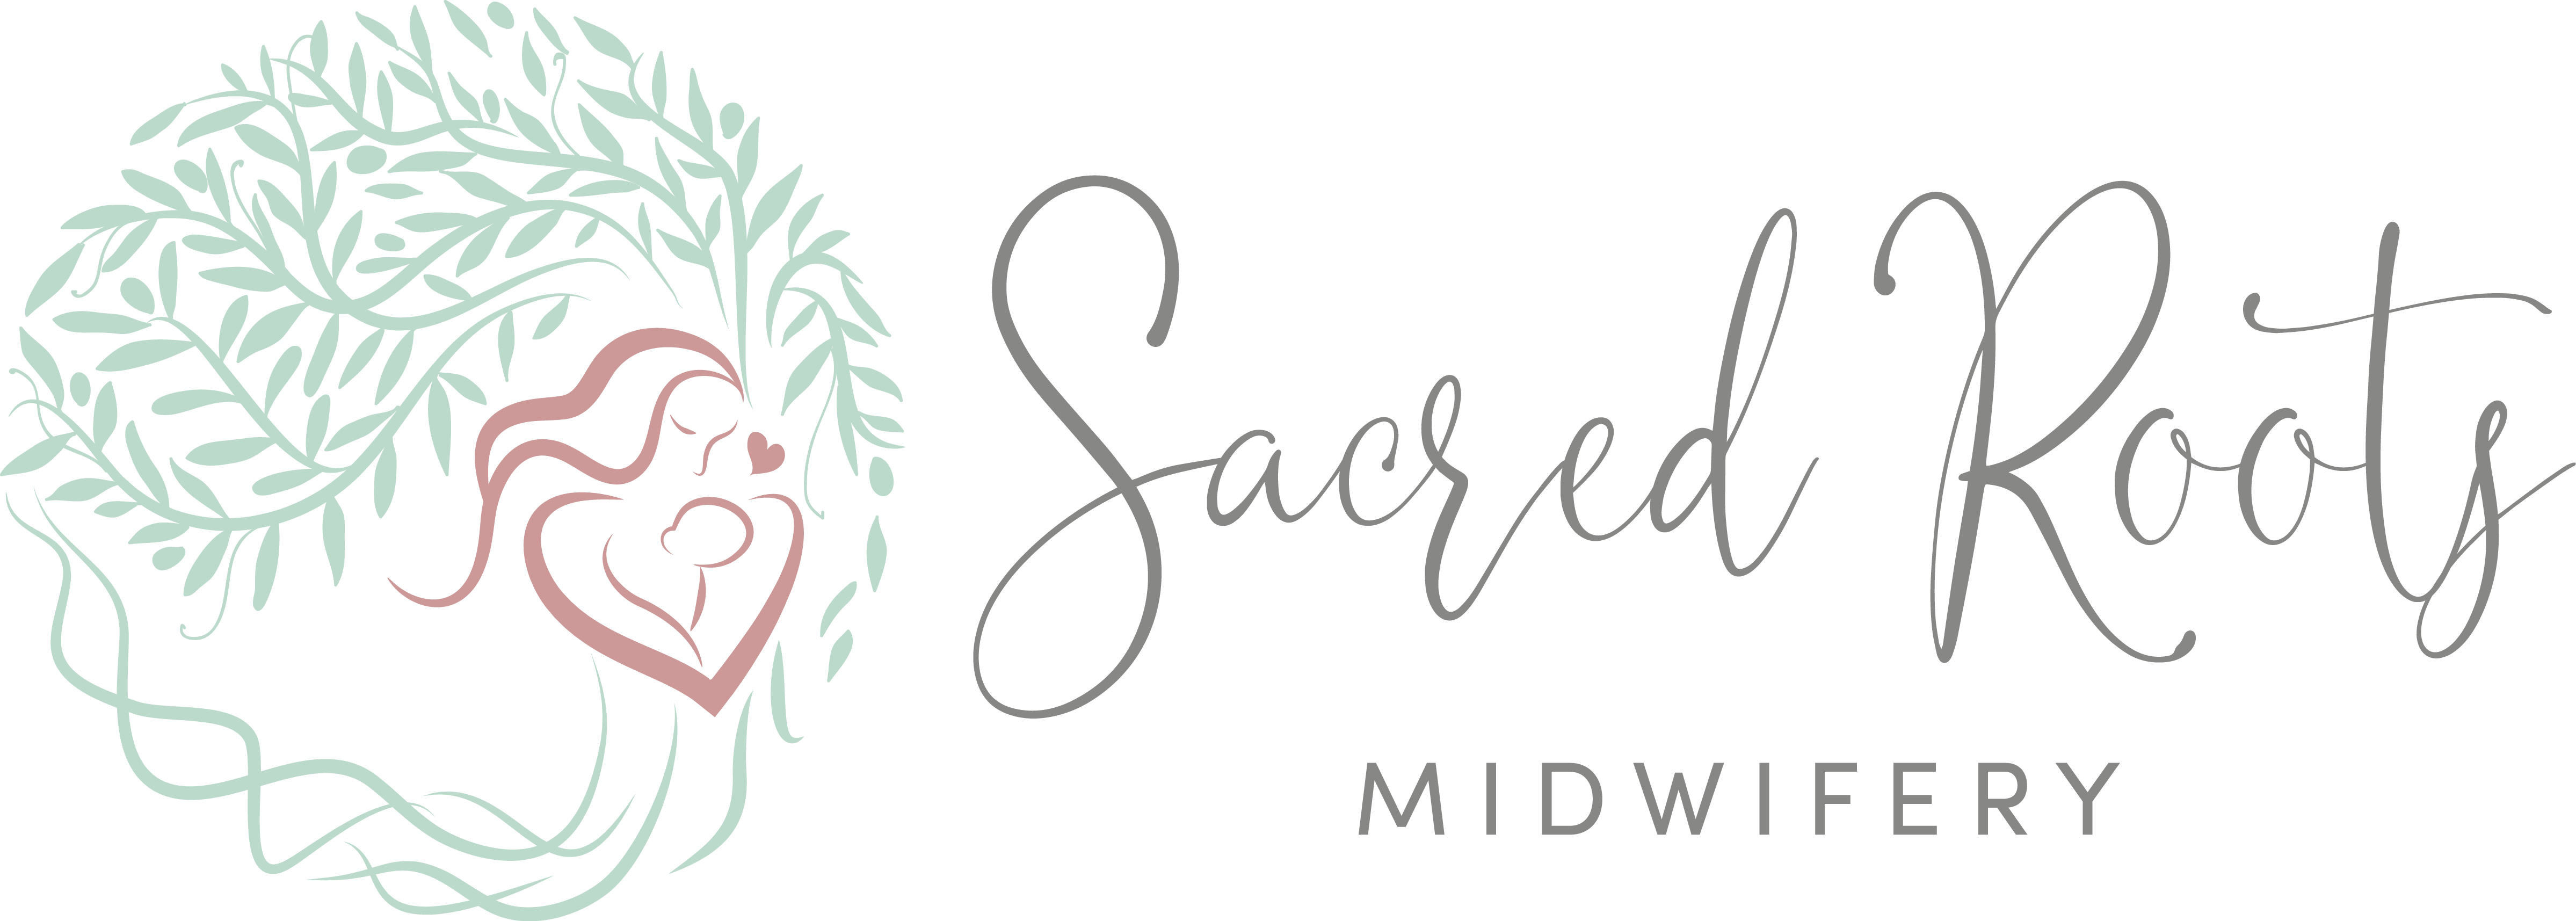 Sacred Roots Midwifery